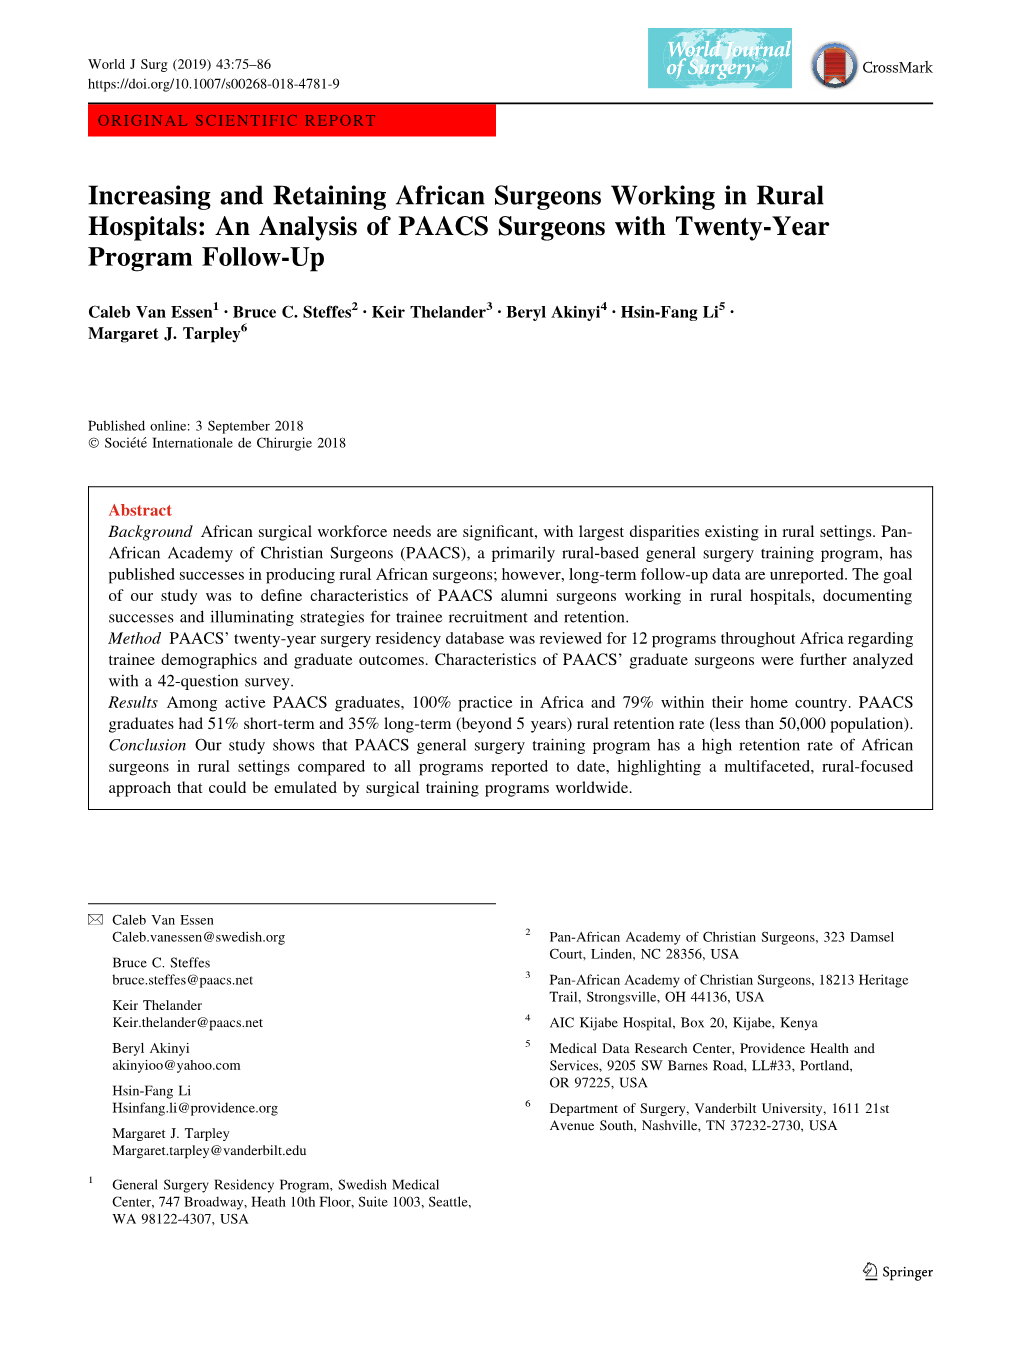 Increasing and Retaining African Surgeons Working in Rural Hospitals: an Analysis of PAACS Surgeons with Twenty-Year Program Follow-Up